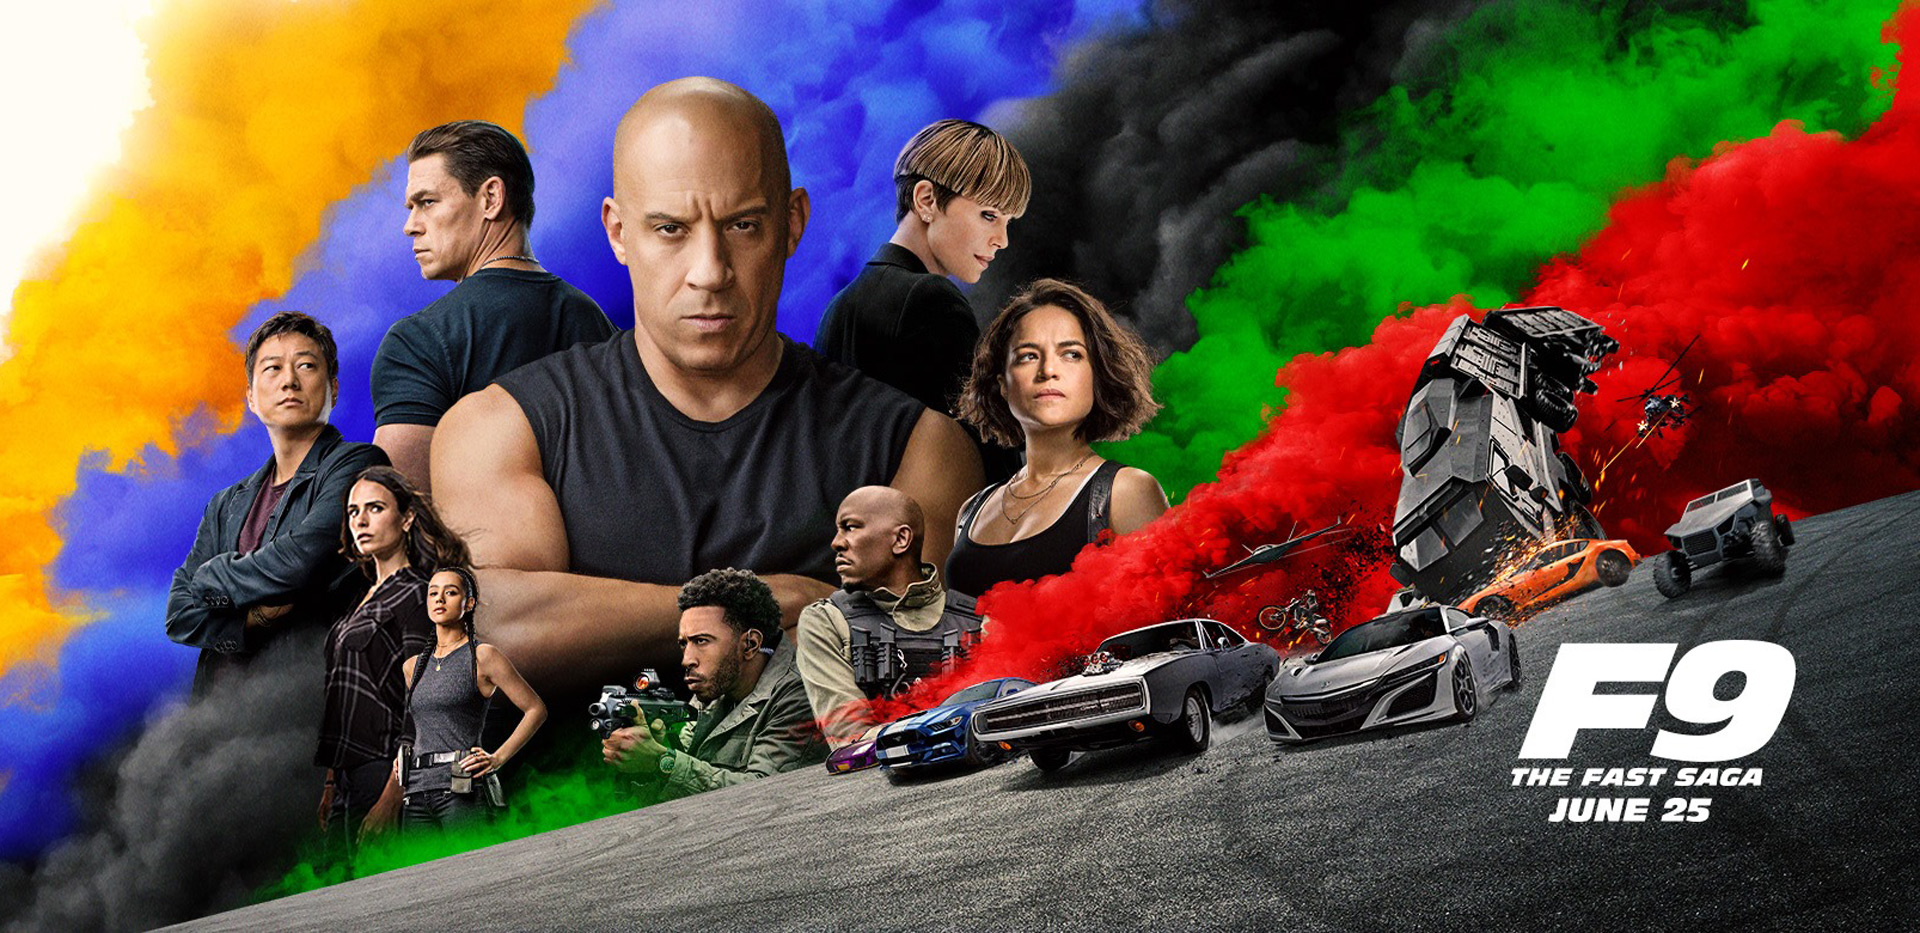 The “Fast and Furious” saga will end in 2024 after 11 movies